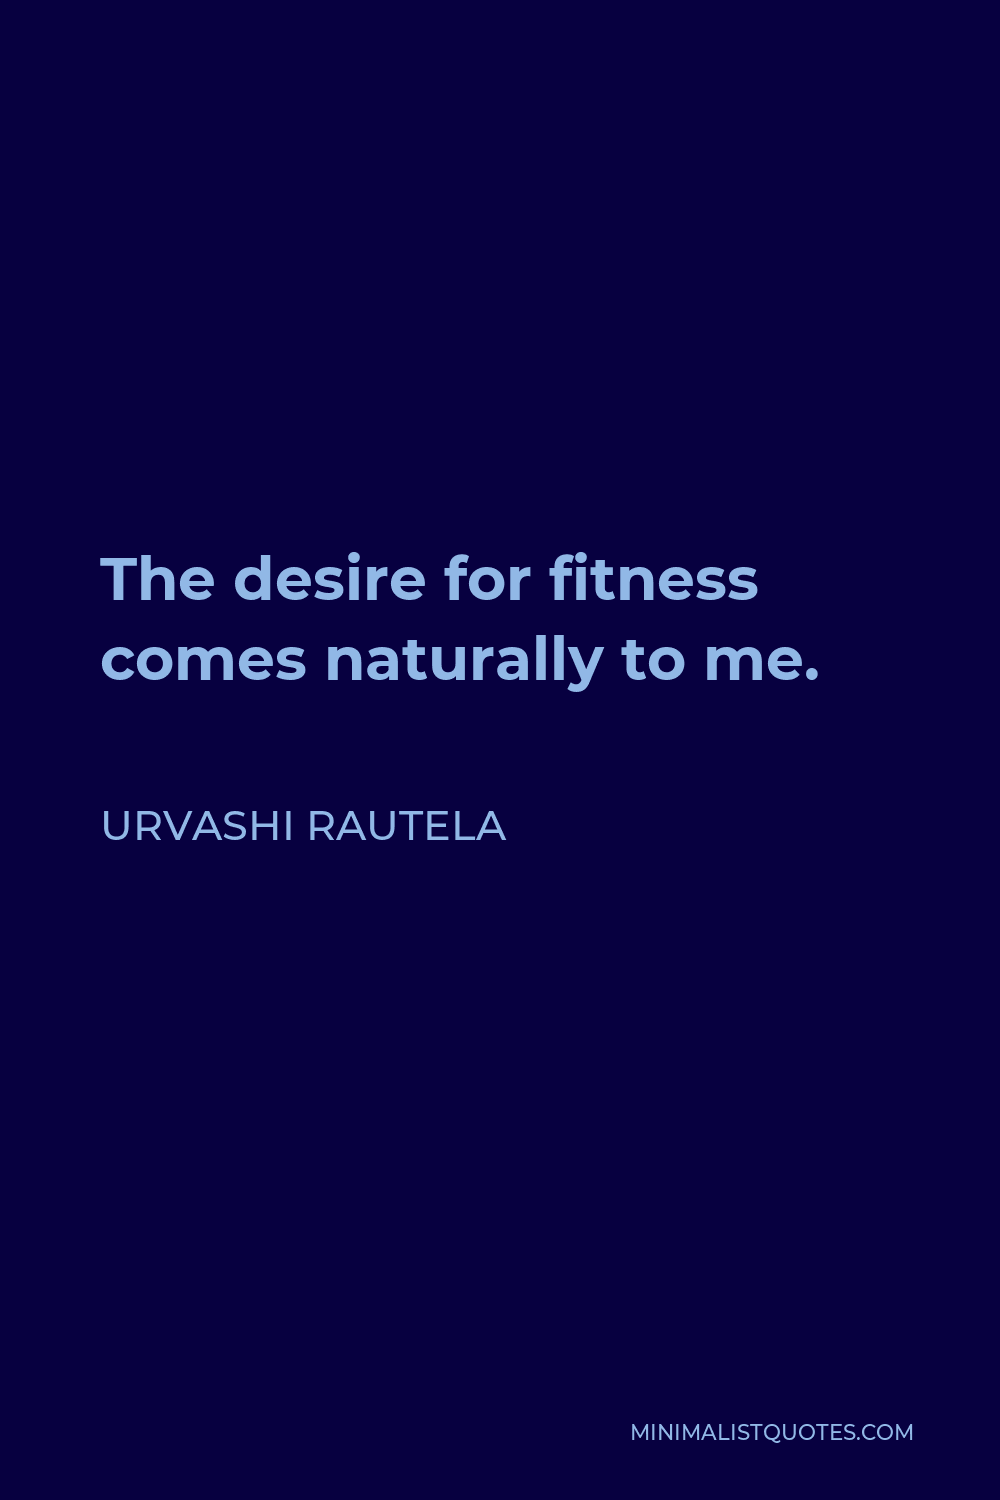 Urvashi Rautela Quote - The desire for fitness comes naturally to me.